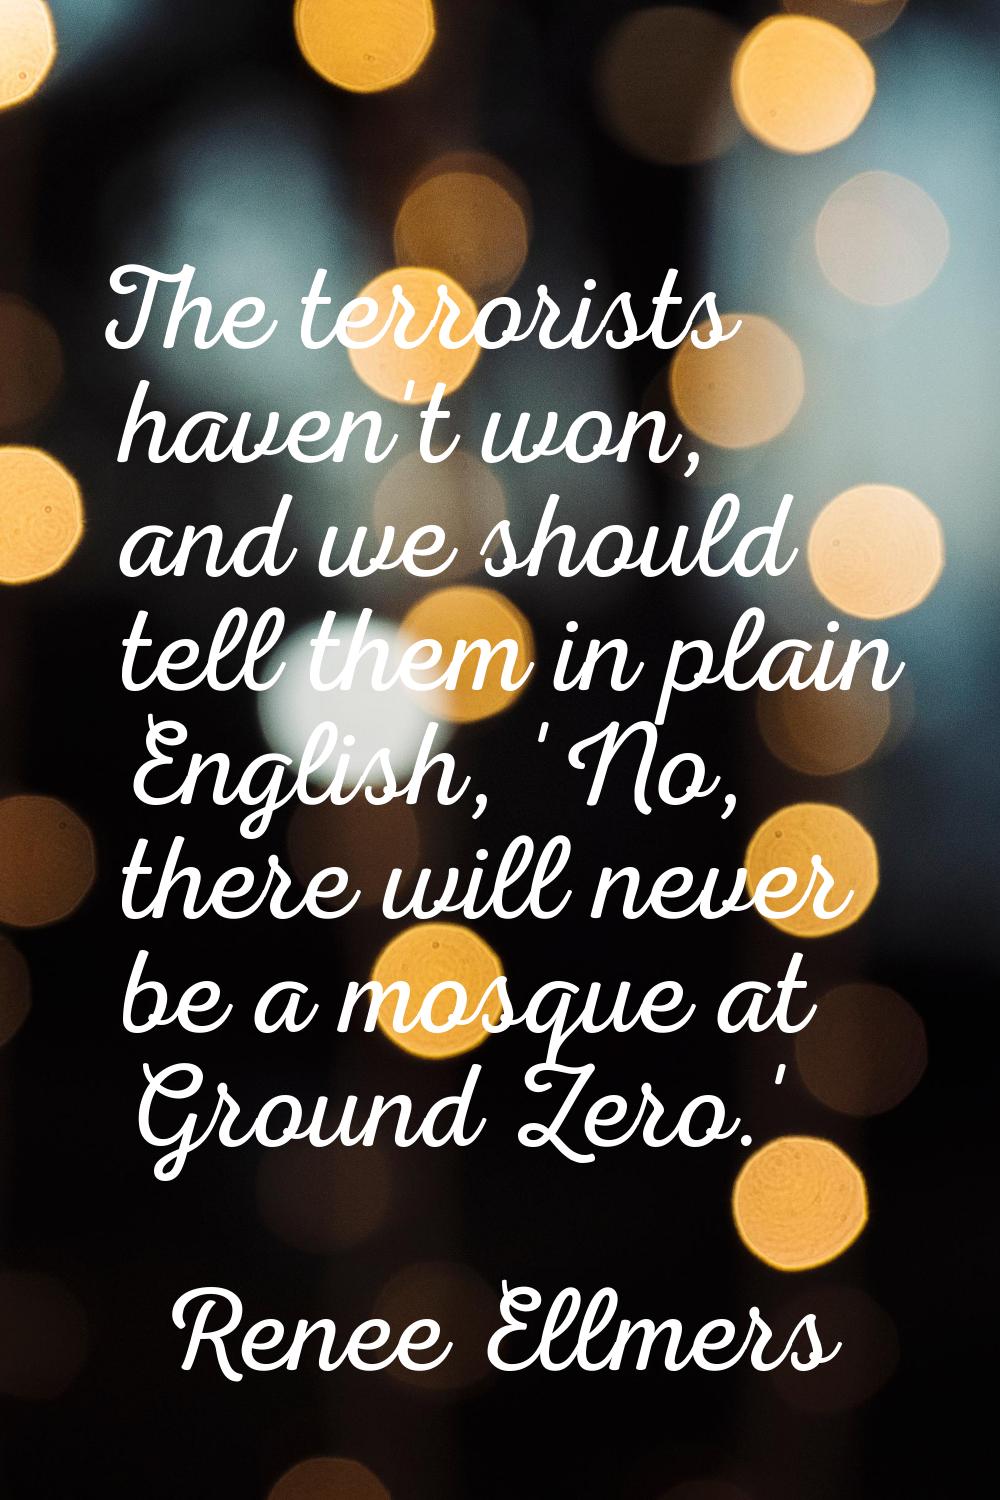 The terrorists haven't won, and we should tell them in plain English, 'No, there will never be a mo